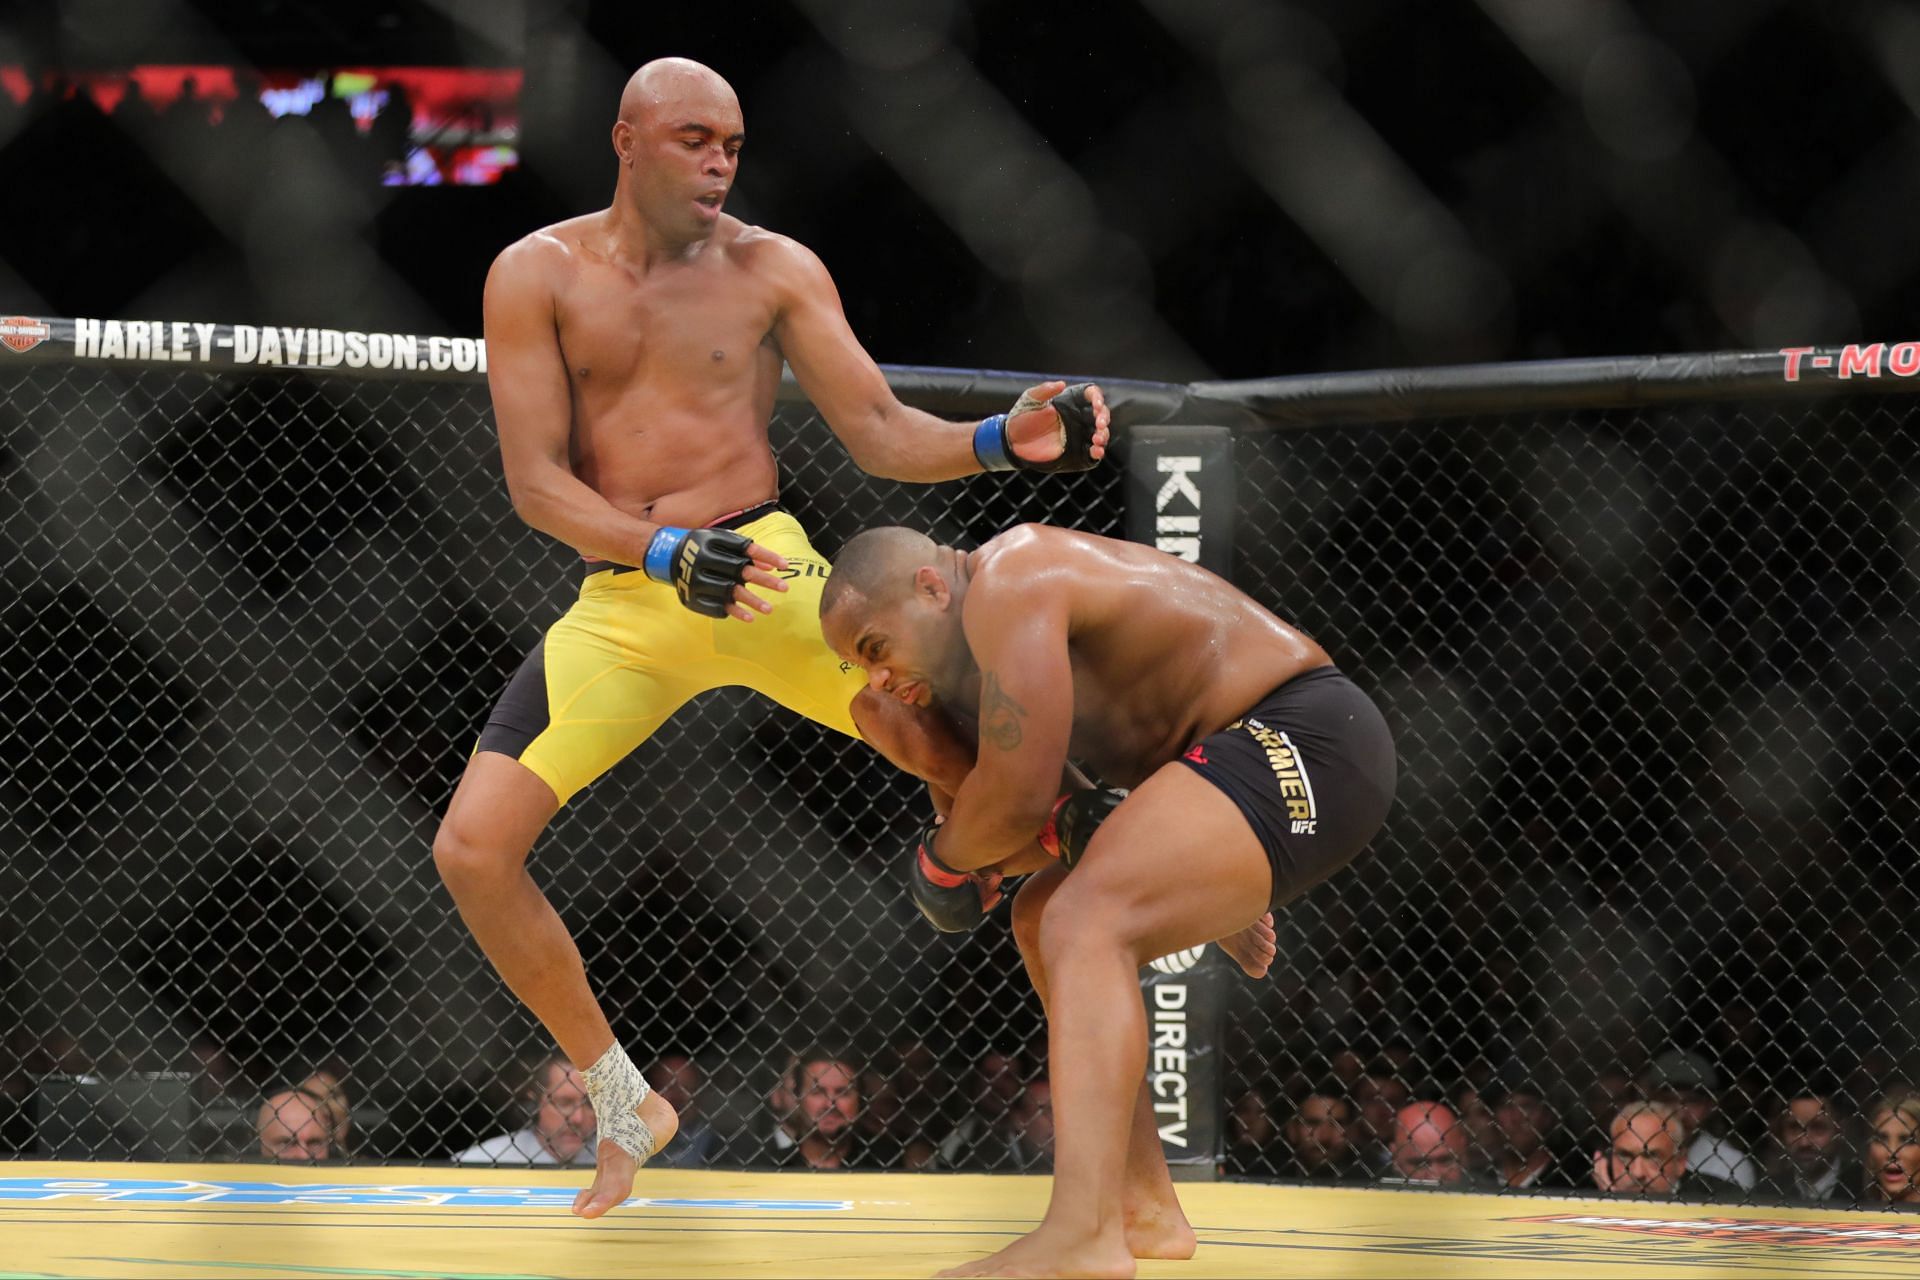 Anderson Silva scored the best submission of 2010 by far